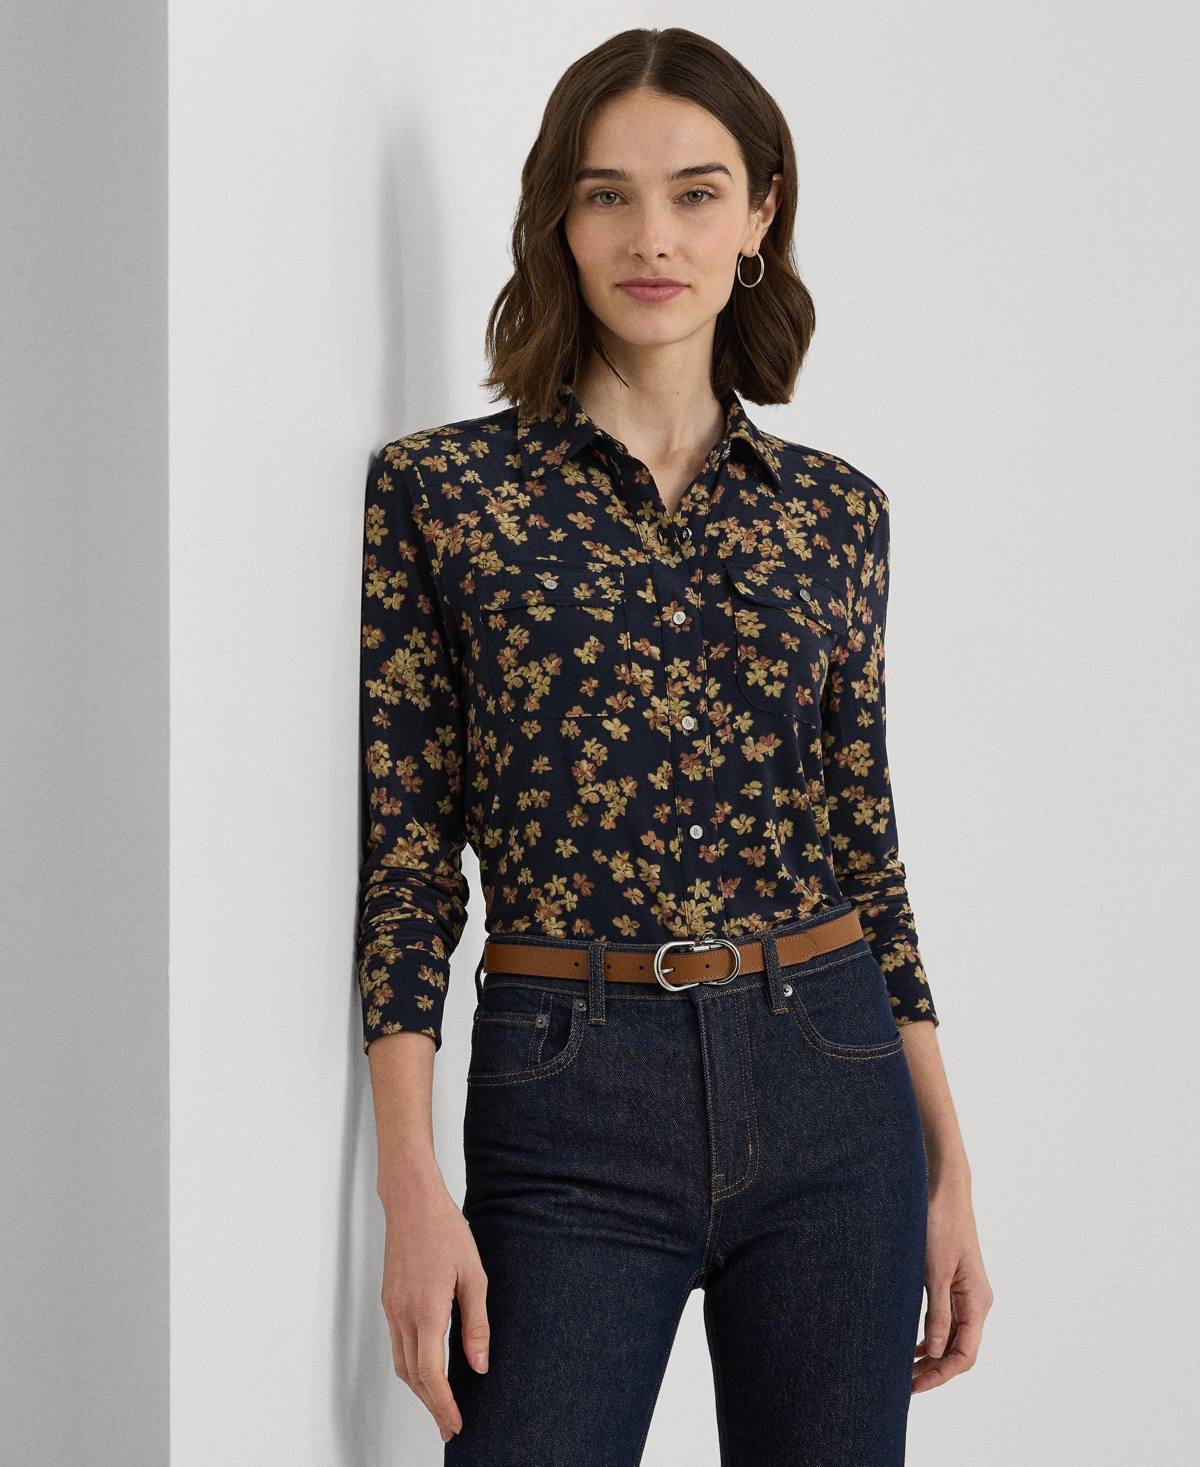 Women's Collared Floral Shirt - Navy Multi